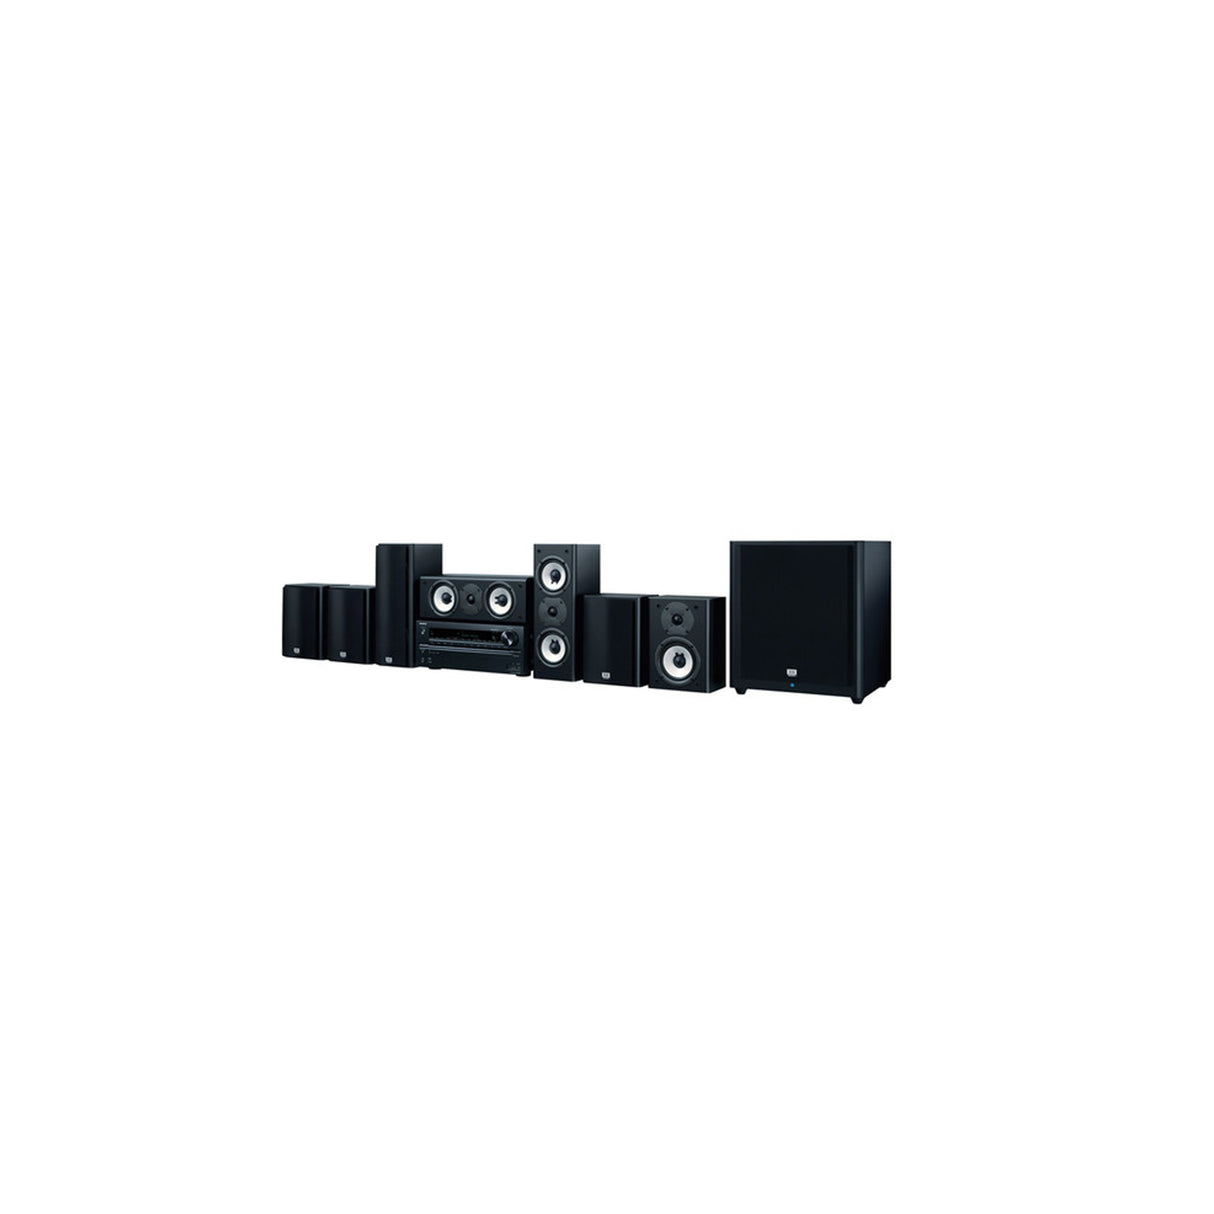 Onkyo HT-S9700 THX - 7.1-Channel Network Home Theater System (Demo Unit/Without Box Unit)